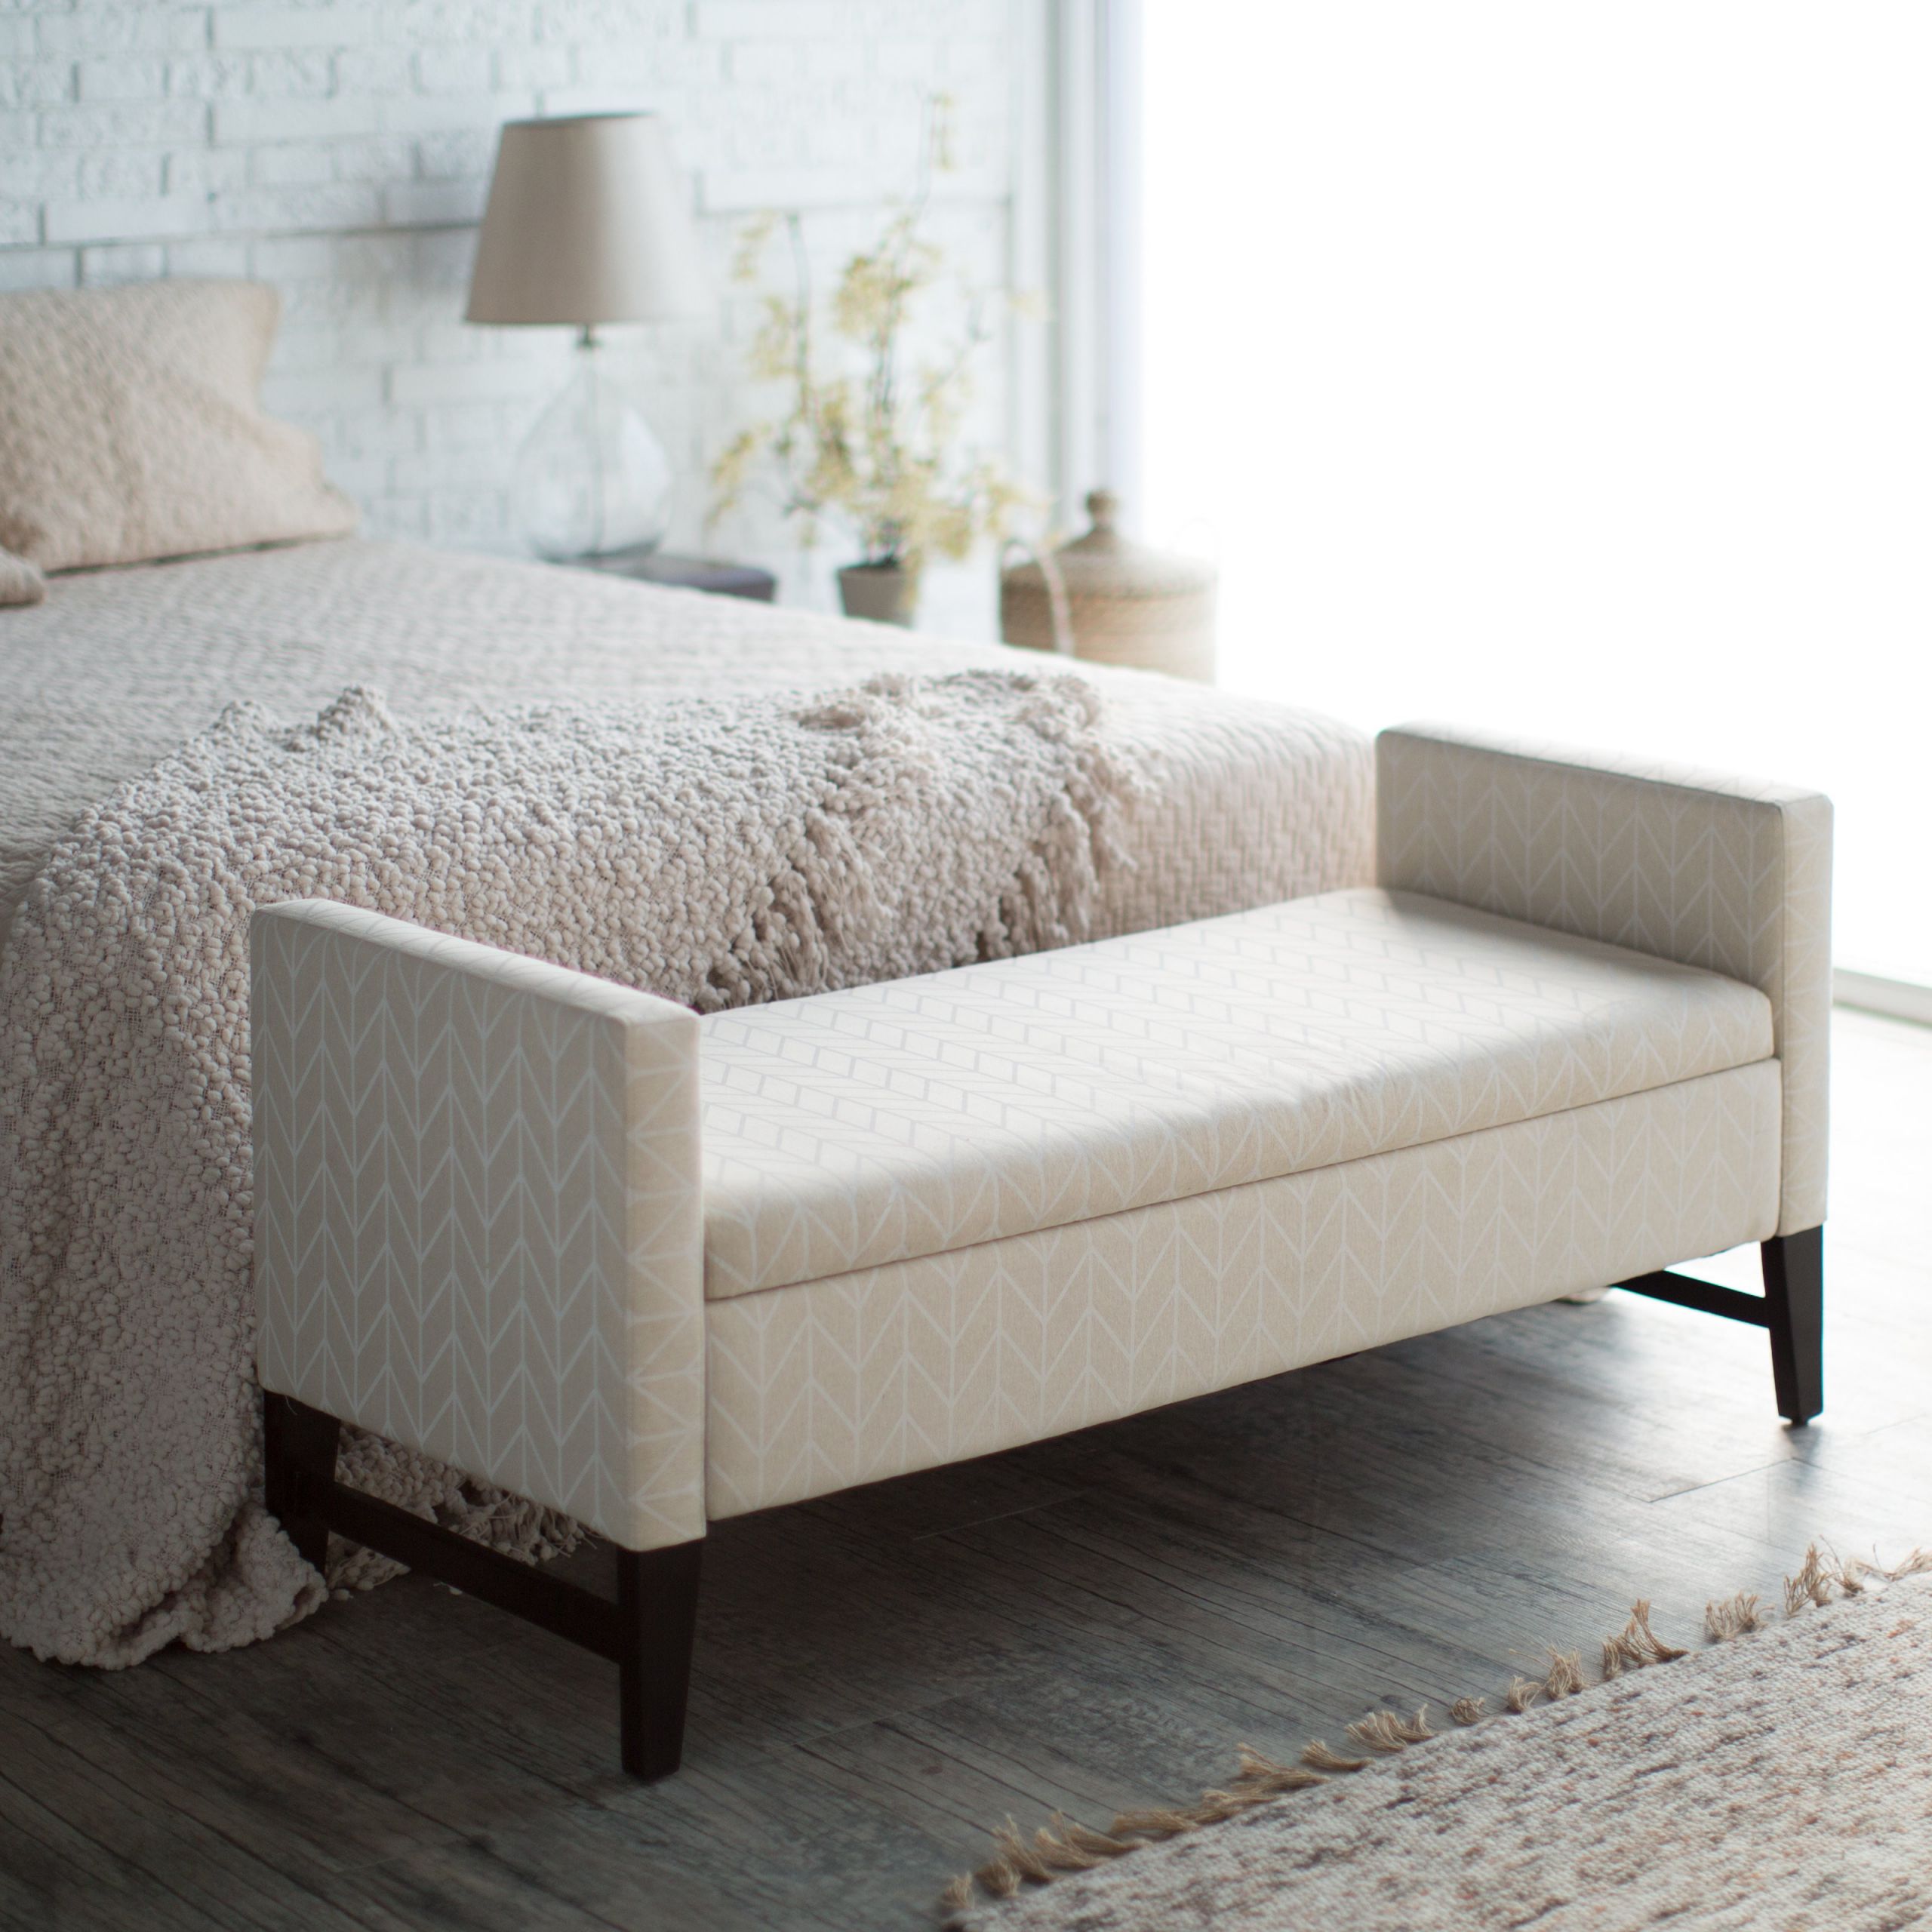 Storage Bedroom Bench
 Perfect End of Bed Storage Bench – HomesFeed